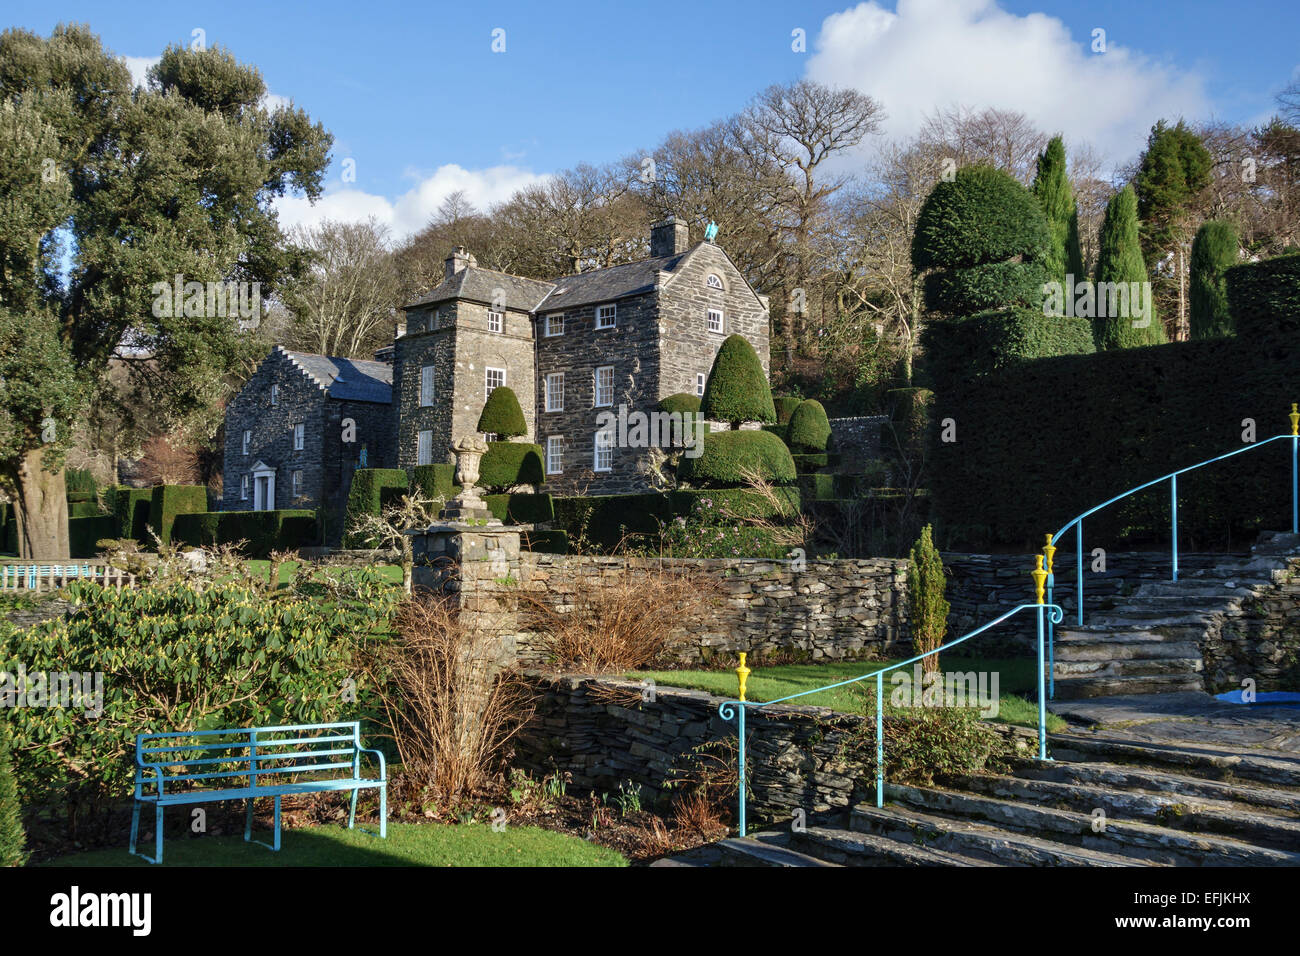 Plas Brondanw, Wales, UK. The formal gardens at the home of Clough Williams-Ellis, architect of nearby Portmeirion. Stock Photo